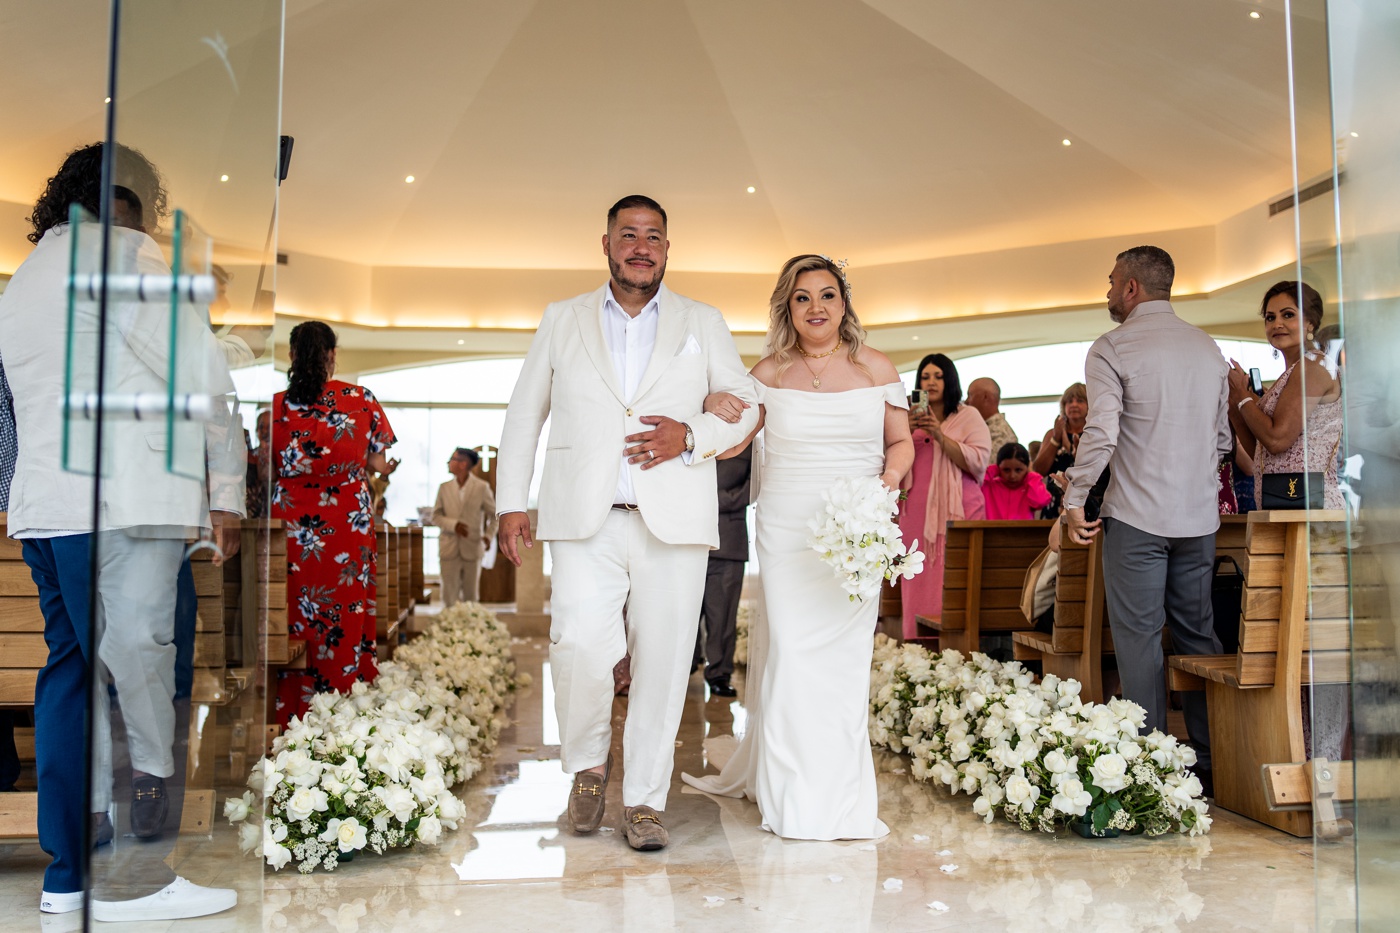 Bride and groom exiting their wedding ceremony at Moon Palace Cancùn